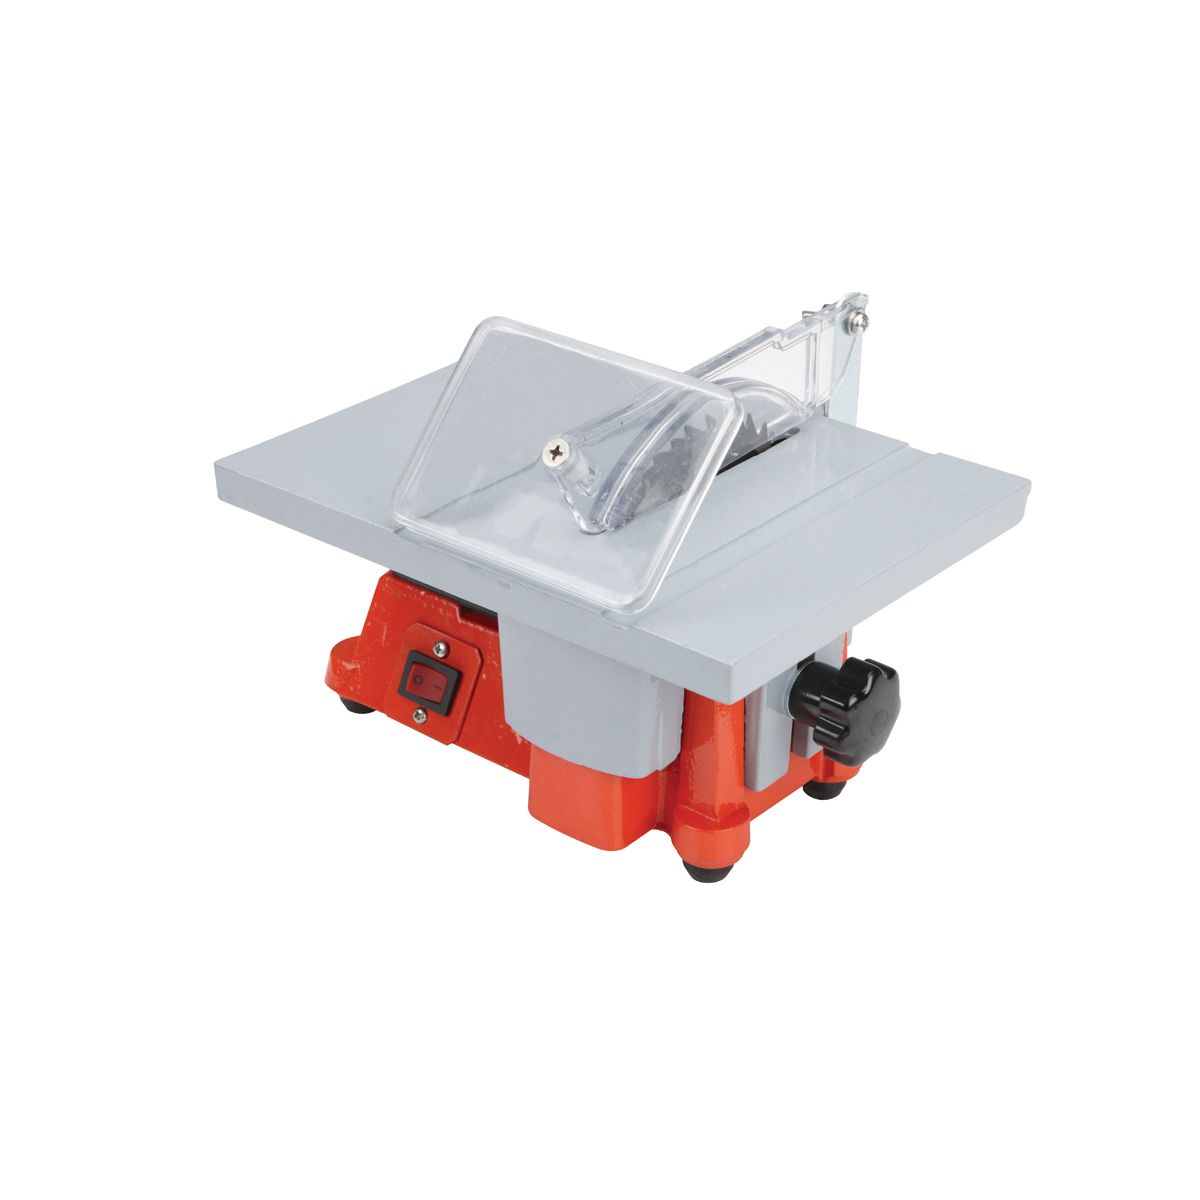 4 in. Mighty_Mite Table Saw with 2 Blades